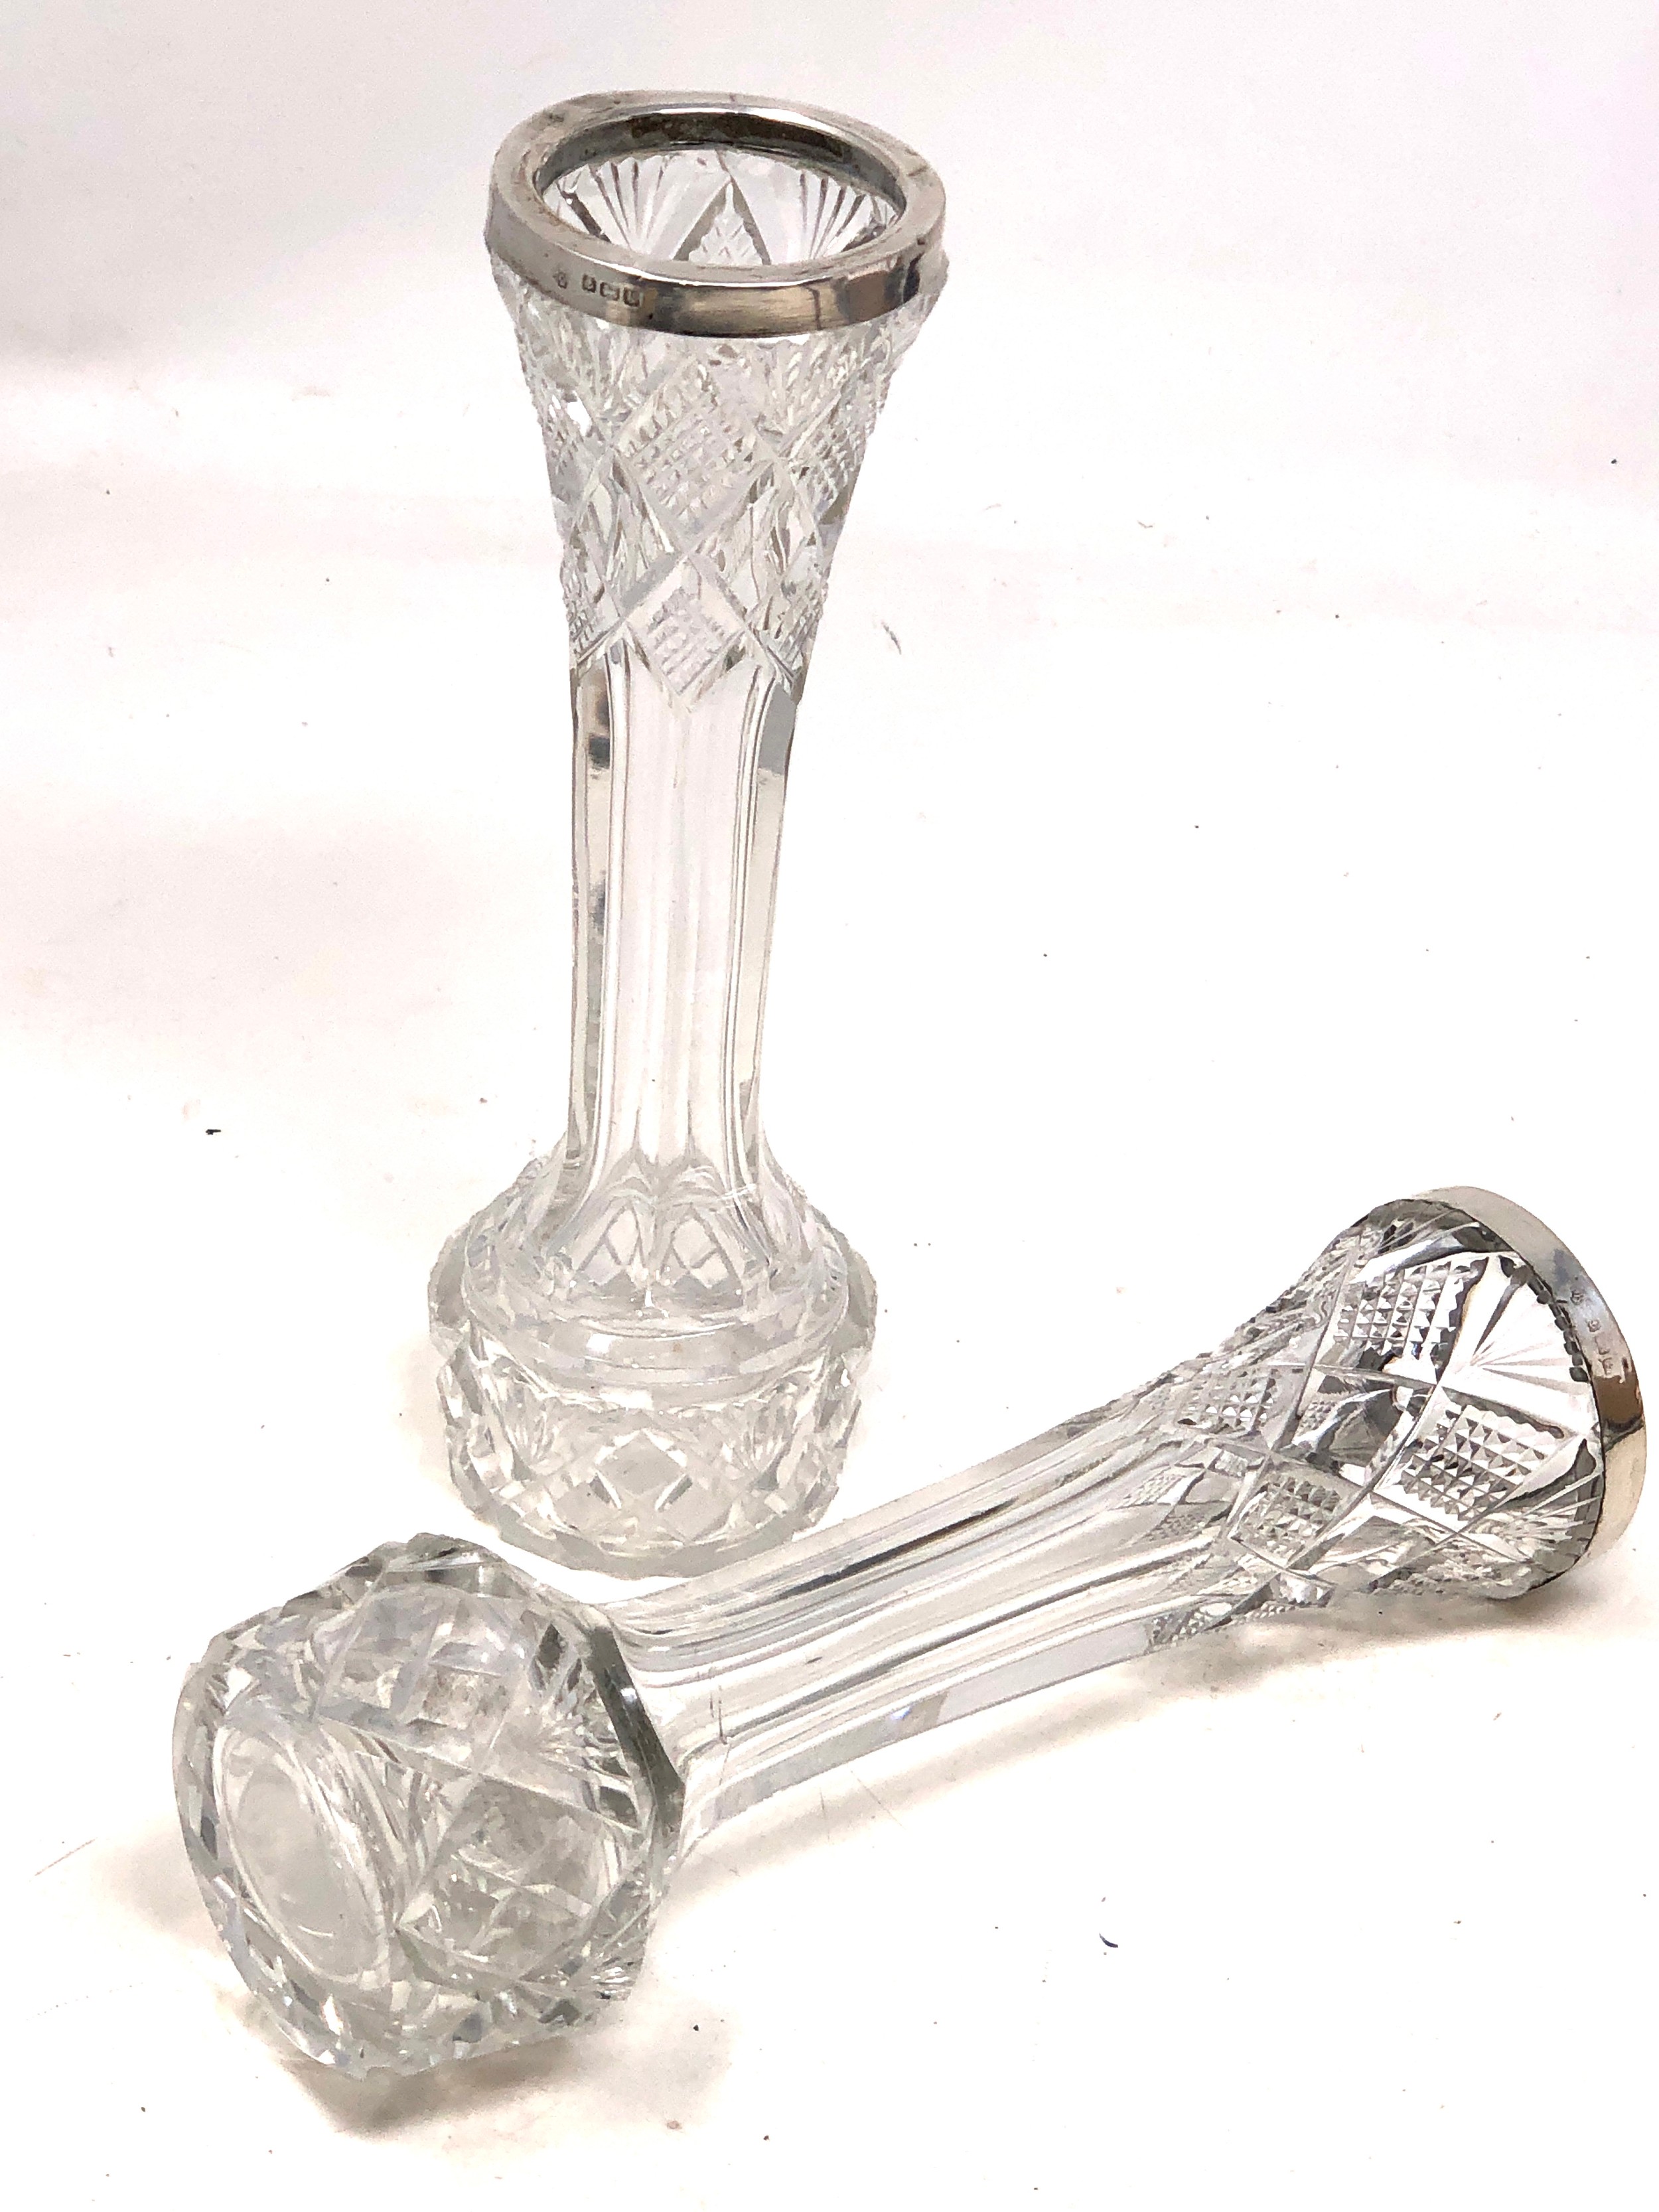 2 antique silver rim cut glass flower vases height 17cm - Image 3 of 4